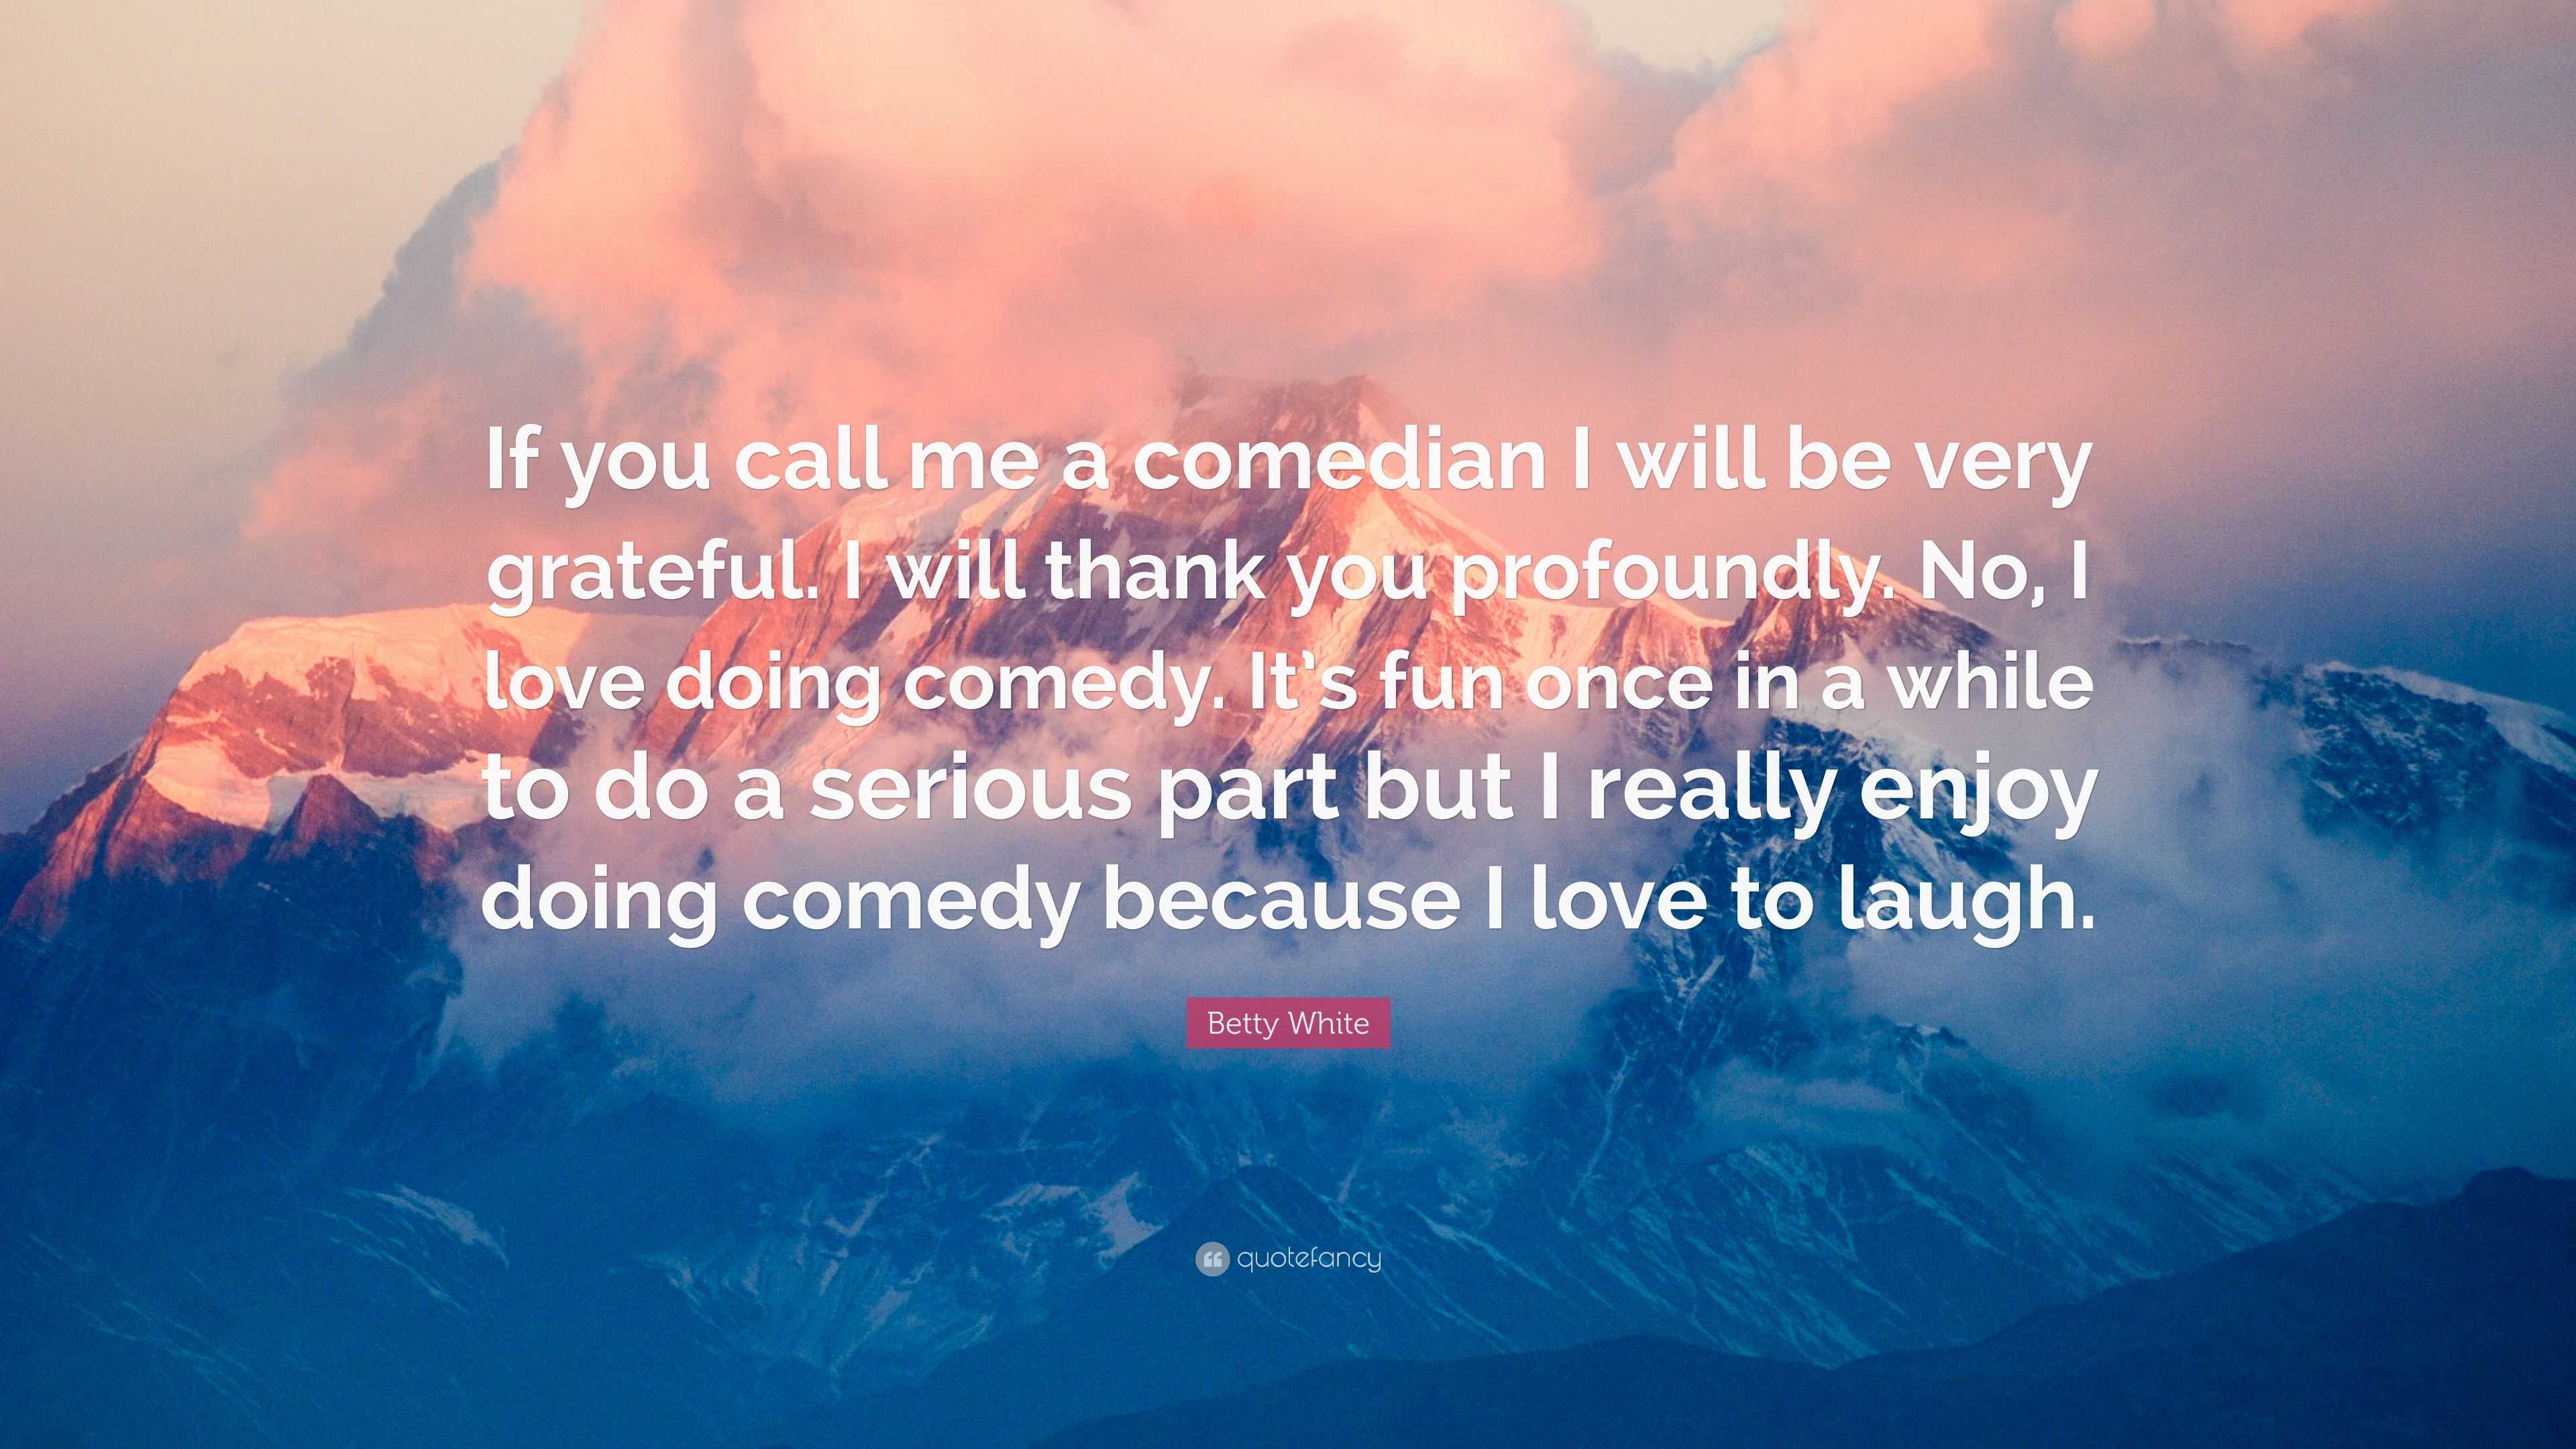 Betty White Quote If You Call Me A Comedian I Will Be Very Grateful I Will Thank You Profoundly No I Love Doing Comedy It S Fun Once I